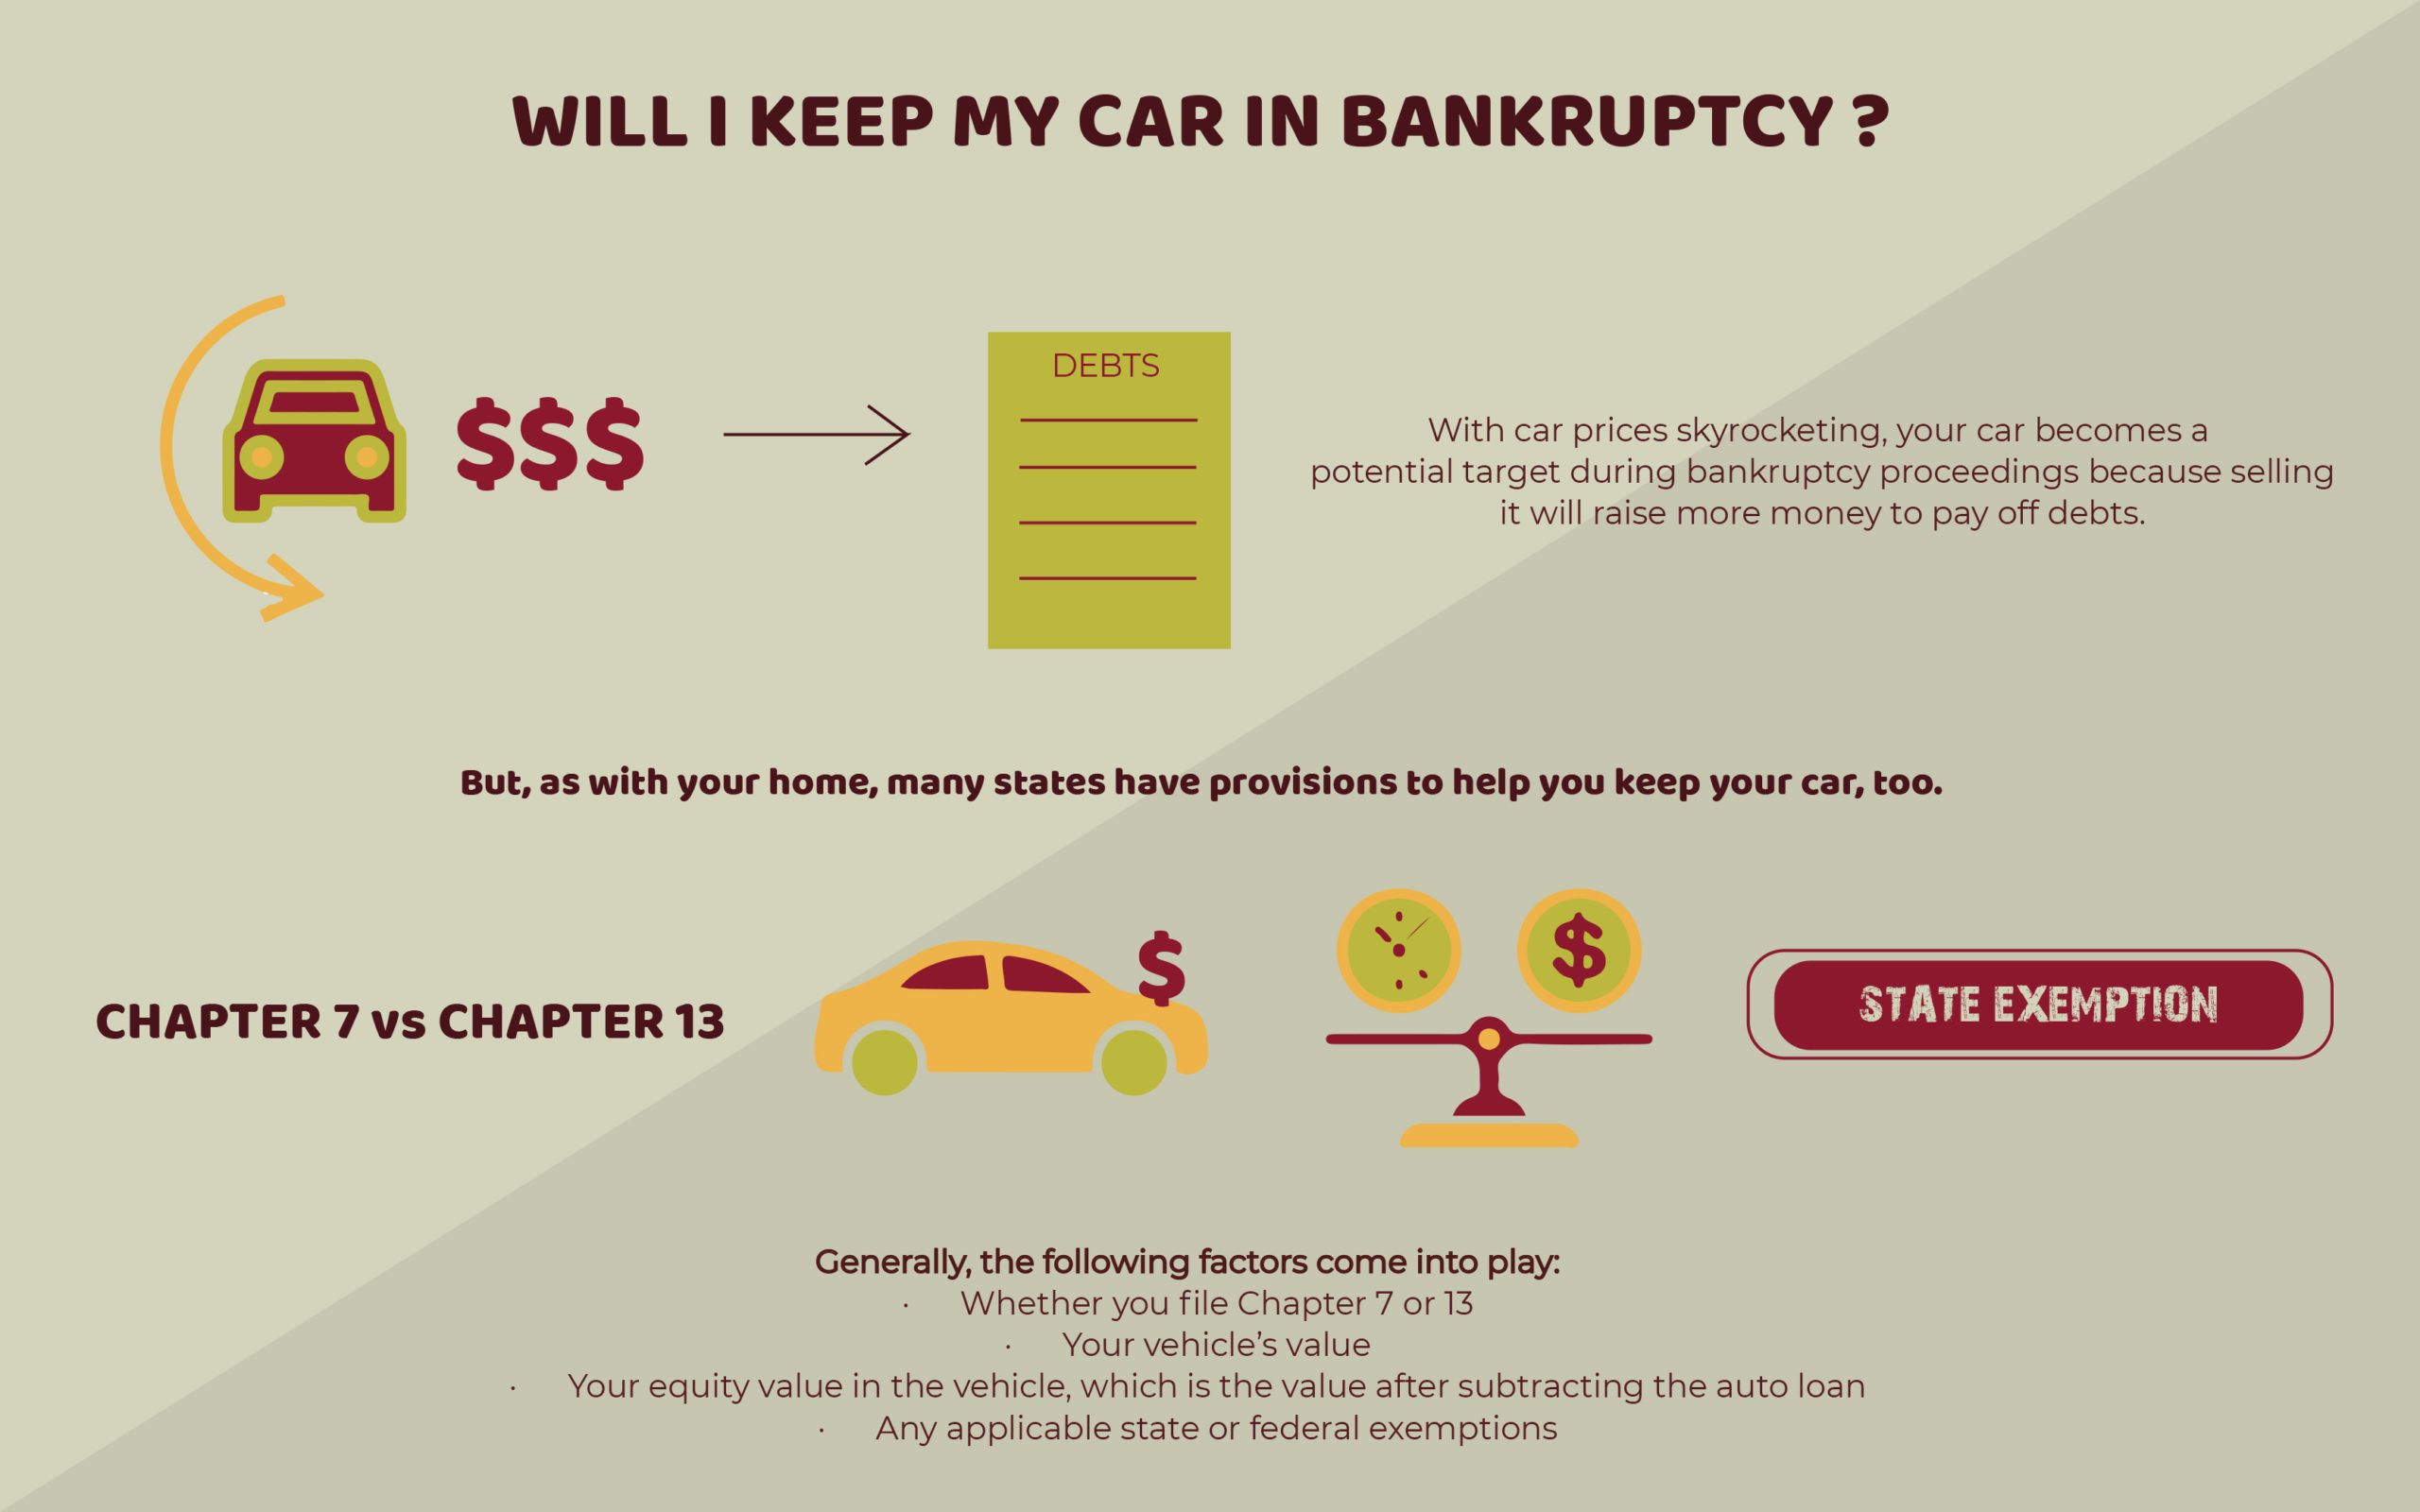 Will I Keep My Car in Bankruptcy?